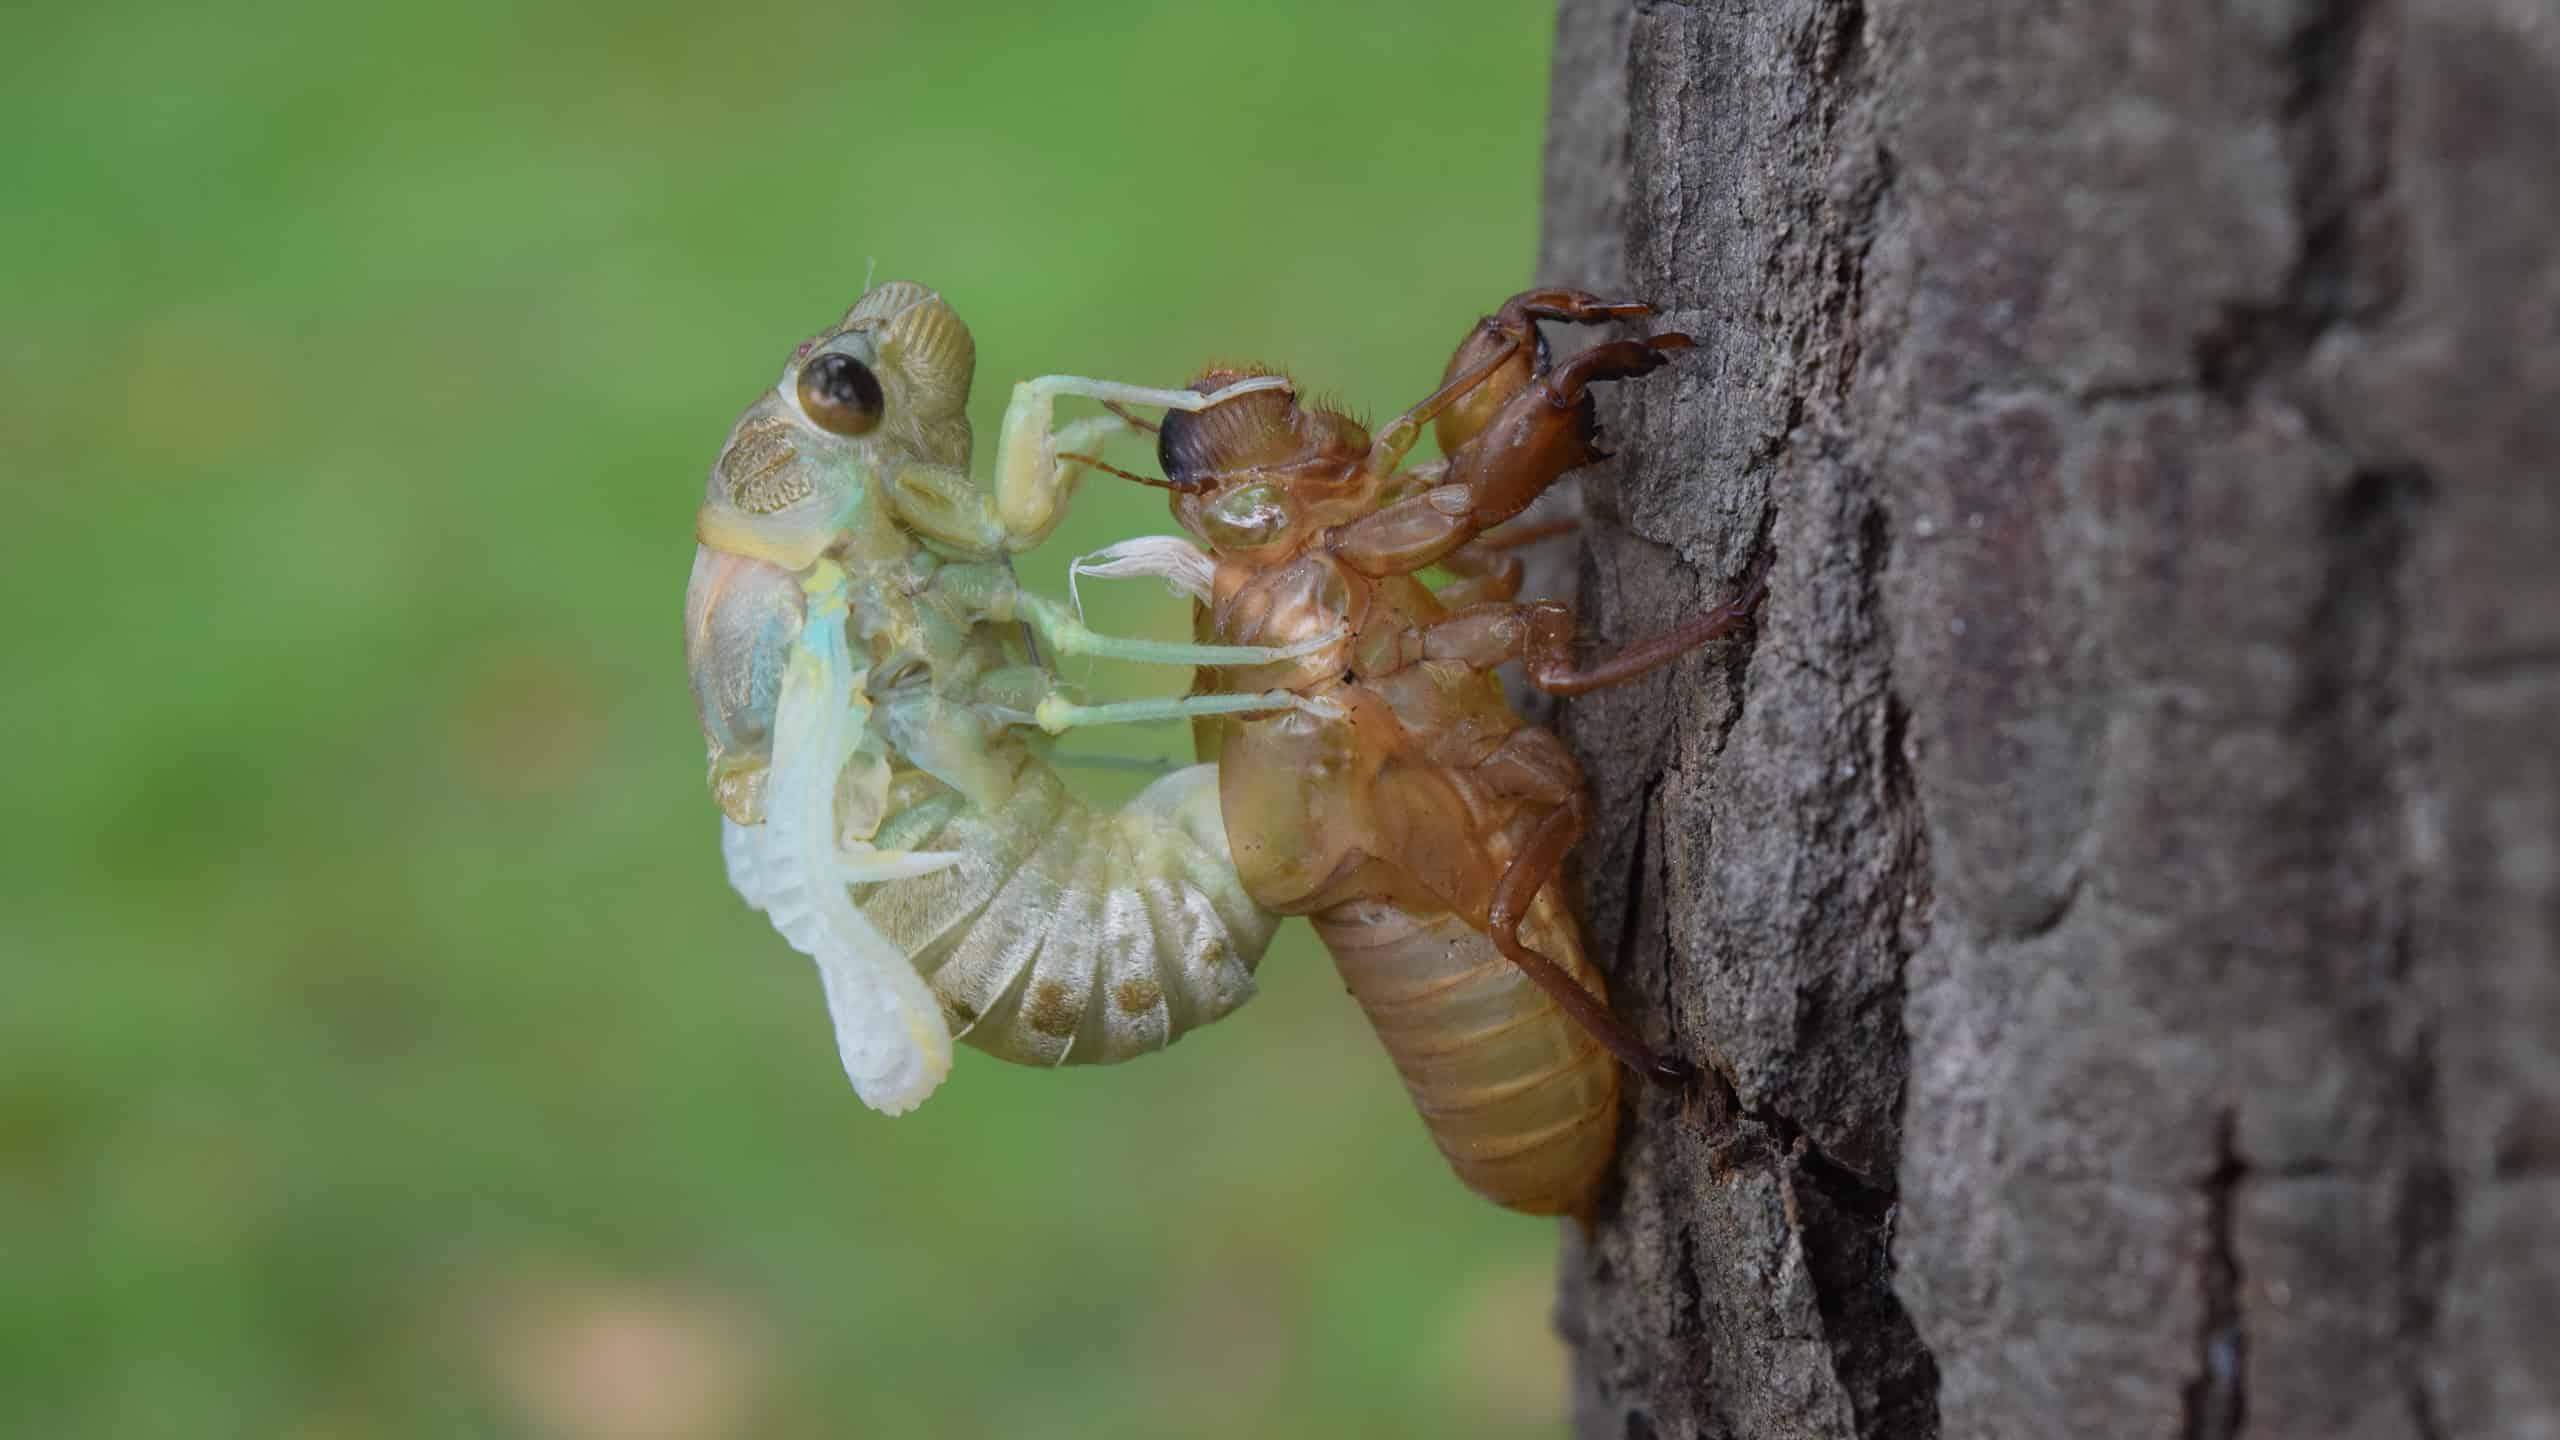 A cicada is visible emerging from its former shell. Th shell iis attached to a tree trunk and is tawny. The emerging cicada is pale pistachio green with light brown accents and a dark round eye. The cicada is seen in profile, facing the right.